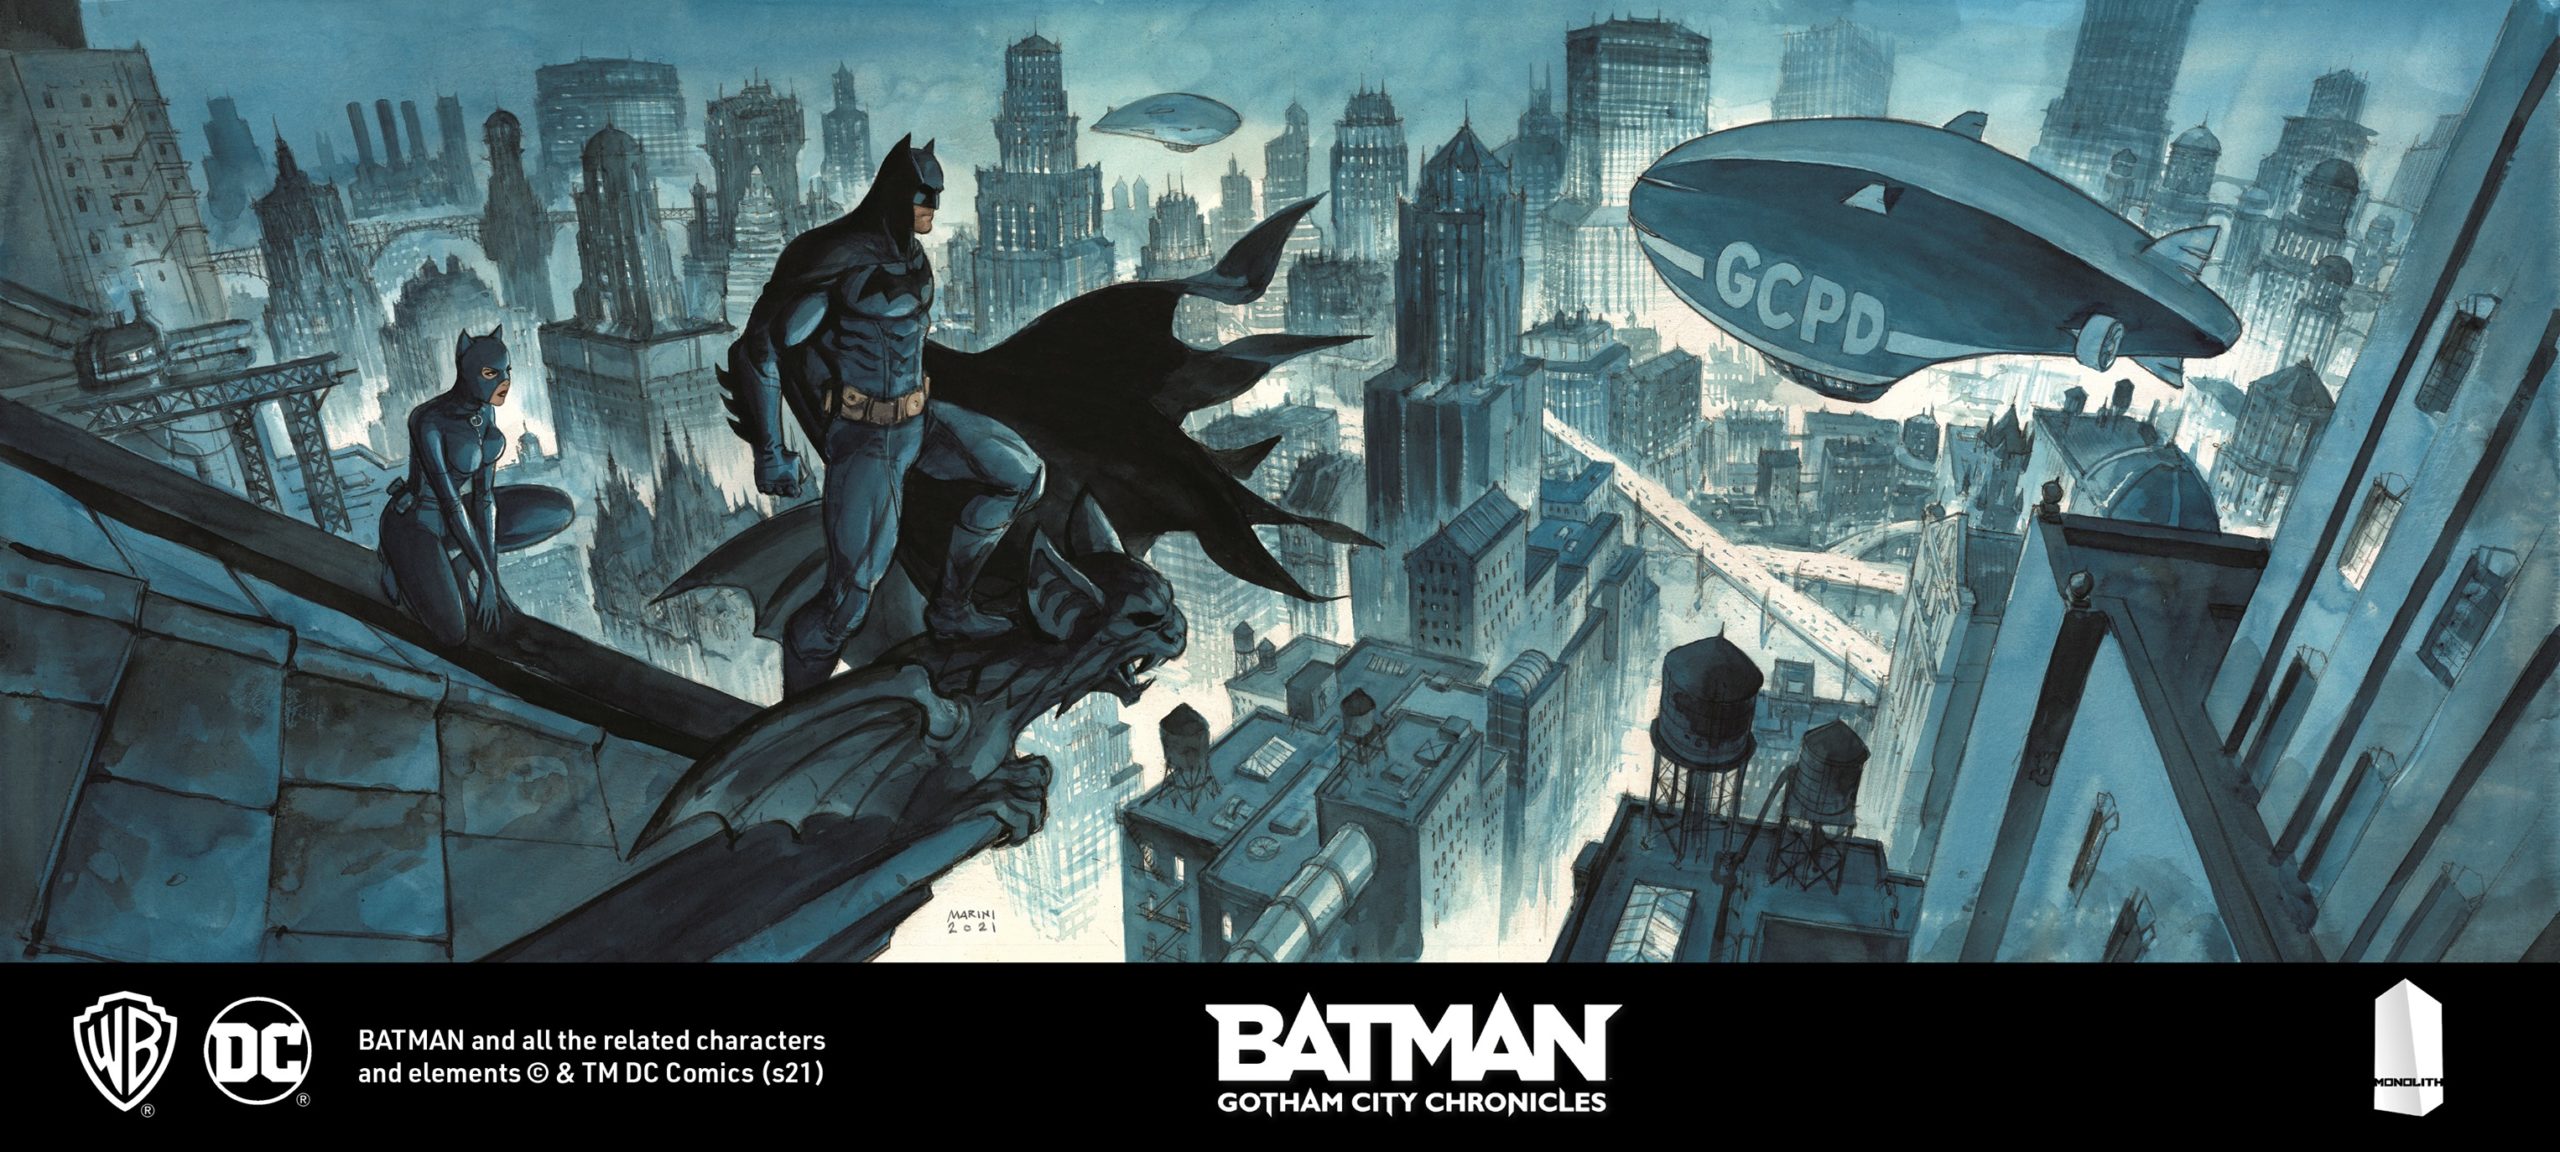 Batman Gotham City Chronicles: The Roleplaying Game Coming Soon